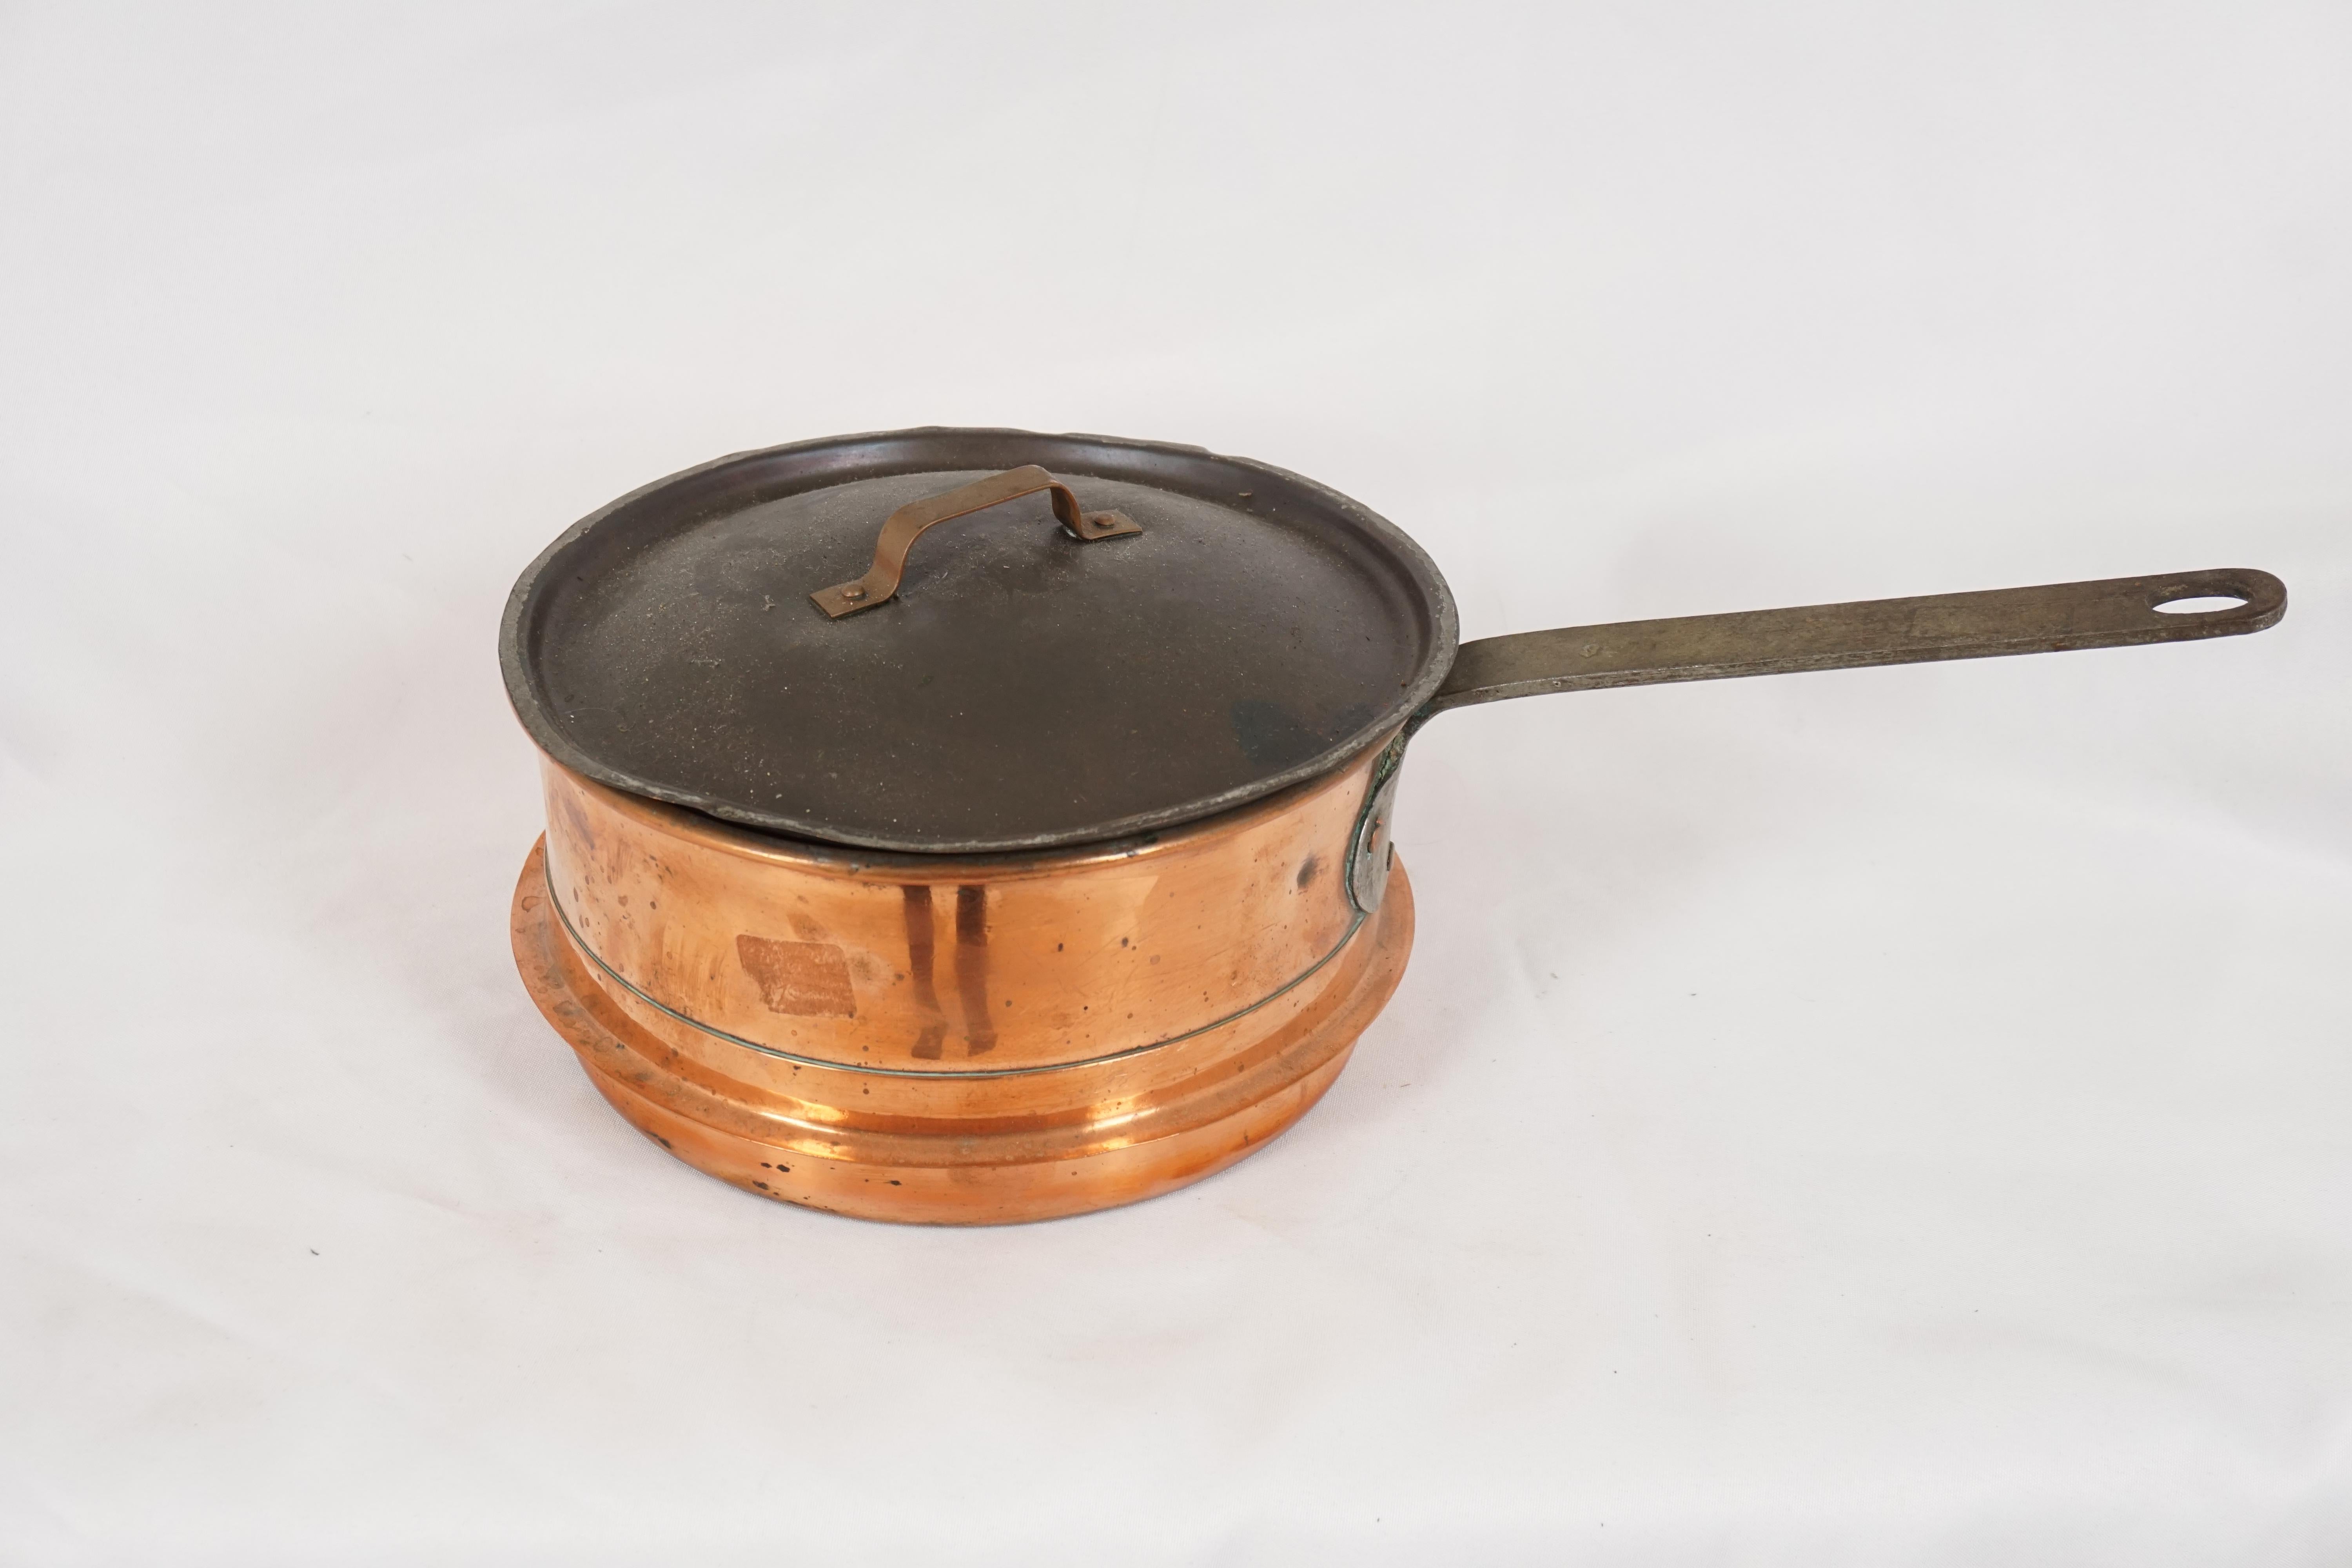 Antique Victorian Saucepan, Cooking pot with handle, Scotland 1890, B2859

Scotland 1890
Solid copper
Circular copper pot
With blacksmith made wrought iron handle
In good condition

B2859

Measures: 15.5